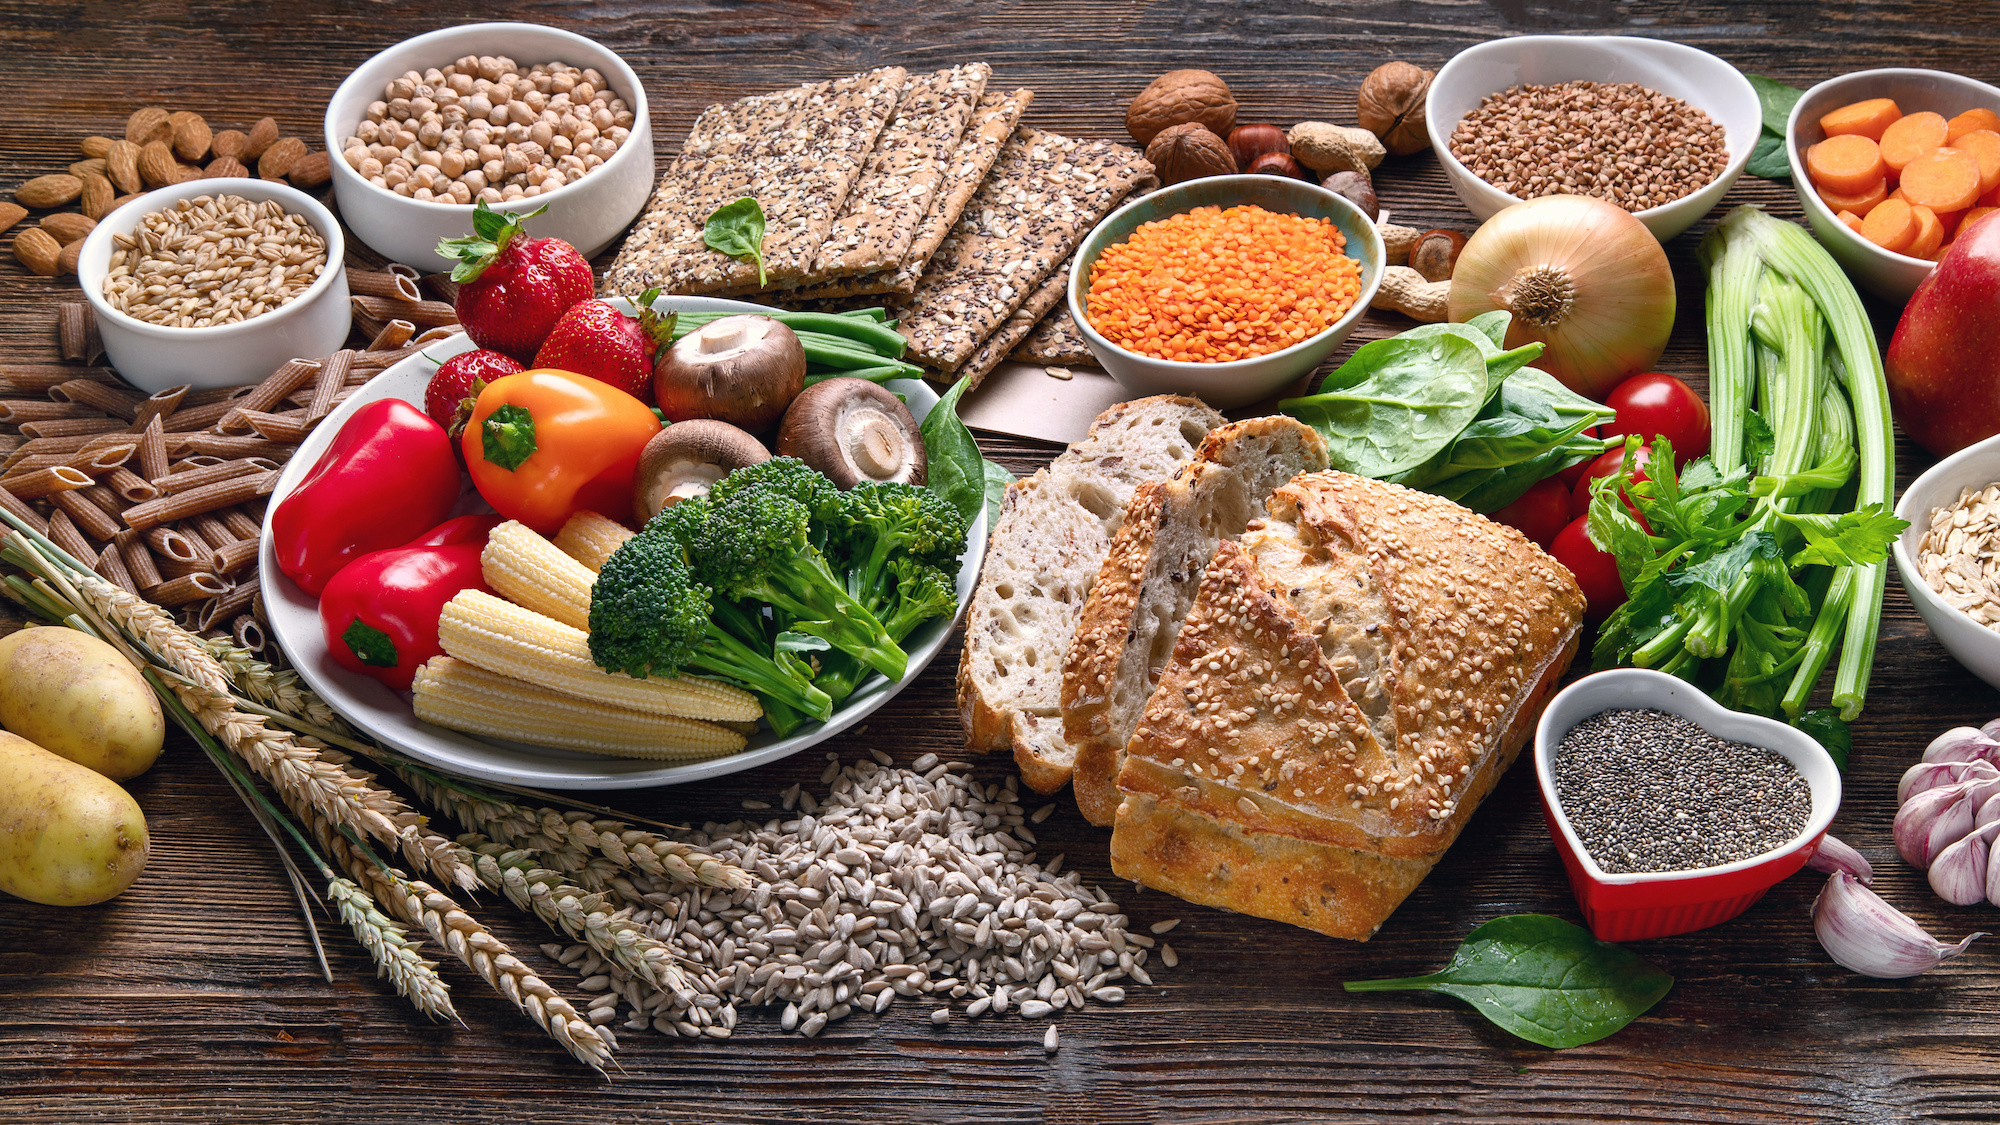 Plant-based products play a crucial role in a "planetary health diet". (Image: Stock Adobe)